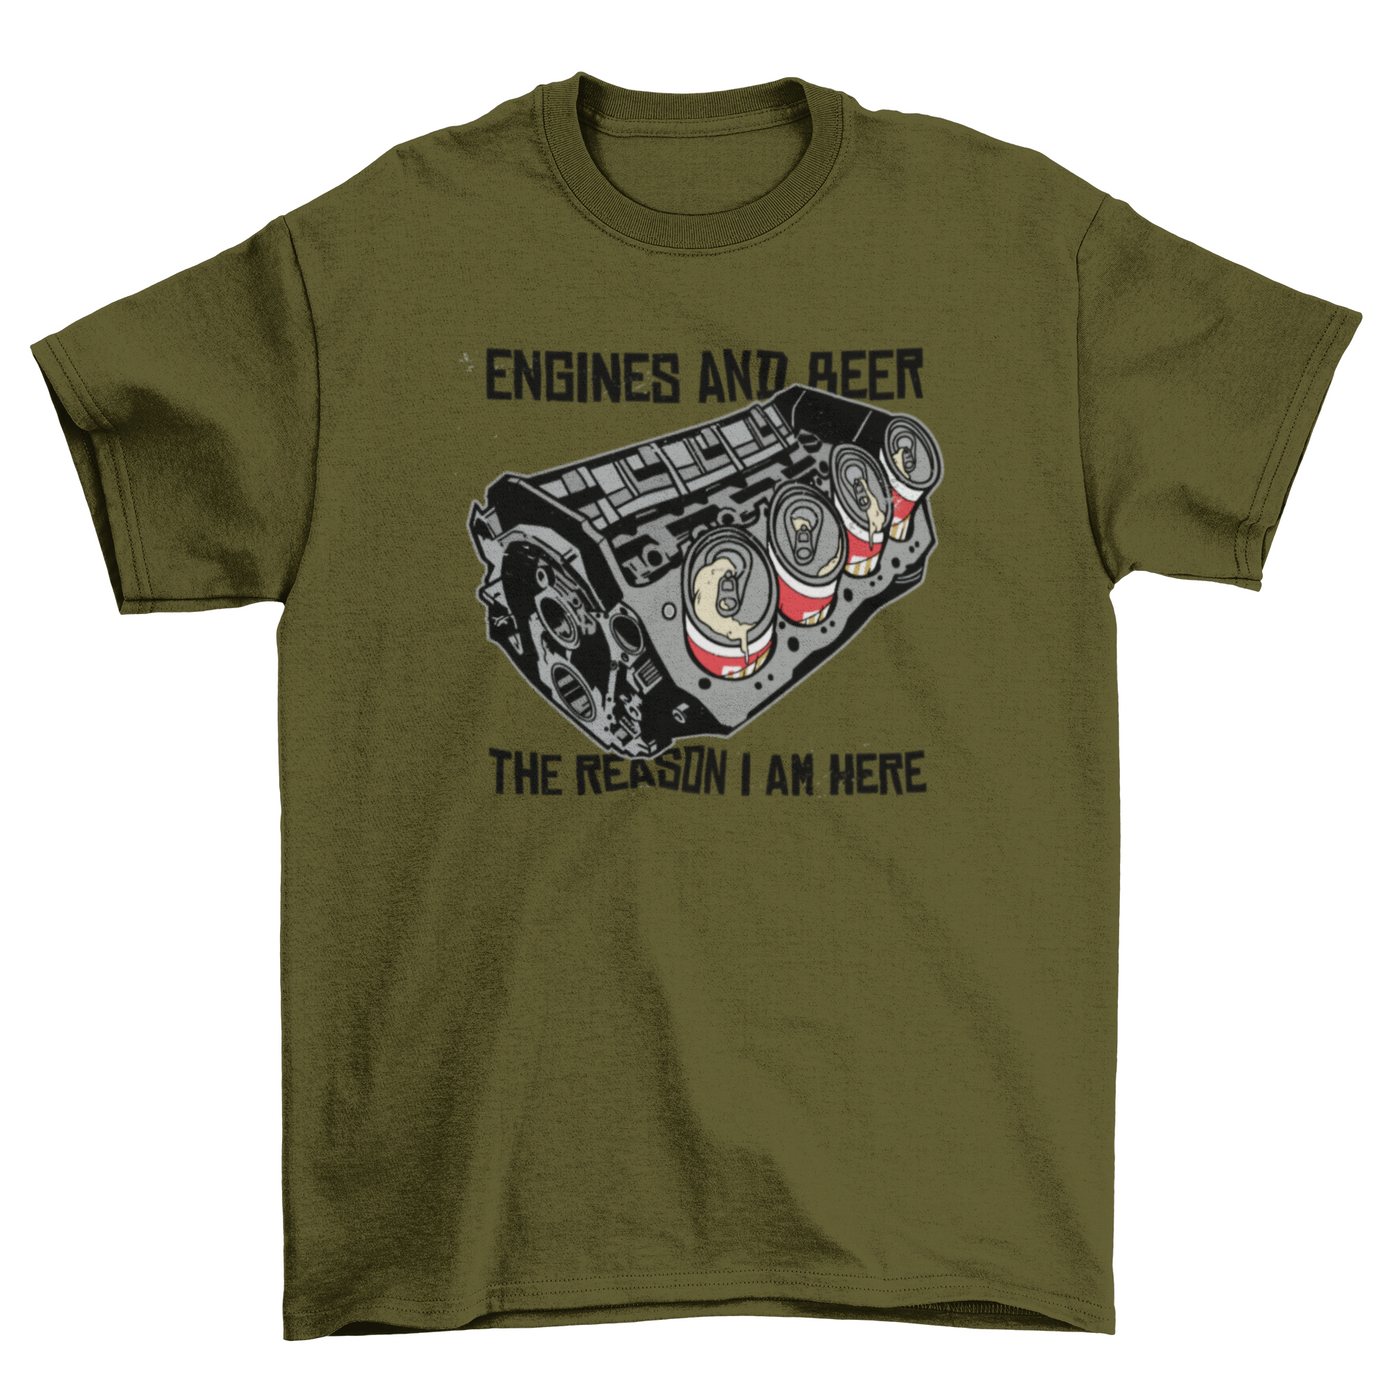 ENGINES AND BEER T-Shirt